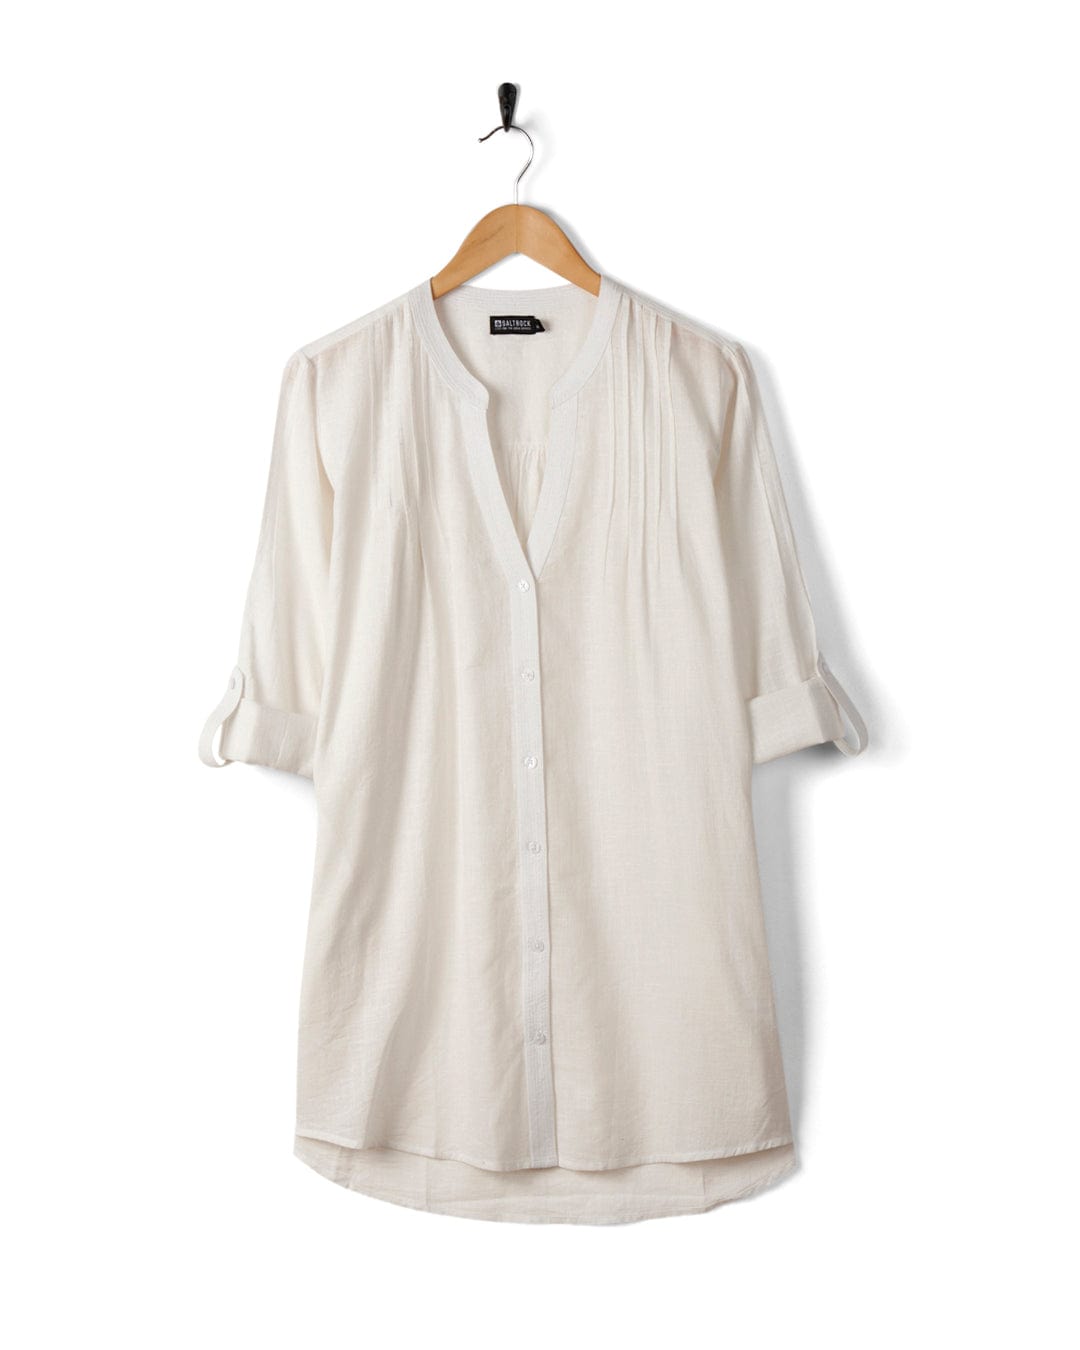 A cream-colored cotton blouse with 3/4 sleeves and button-down front, hanging on a black hanger against a white background.